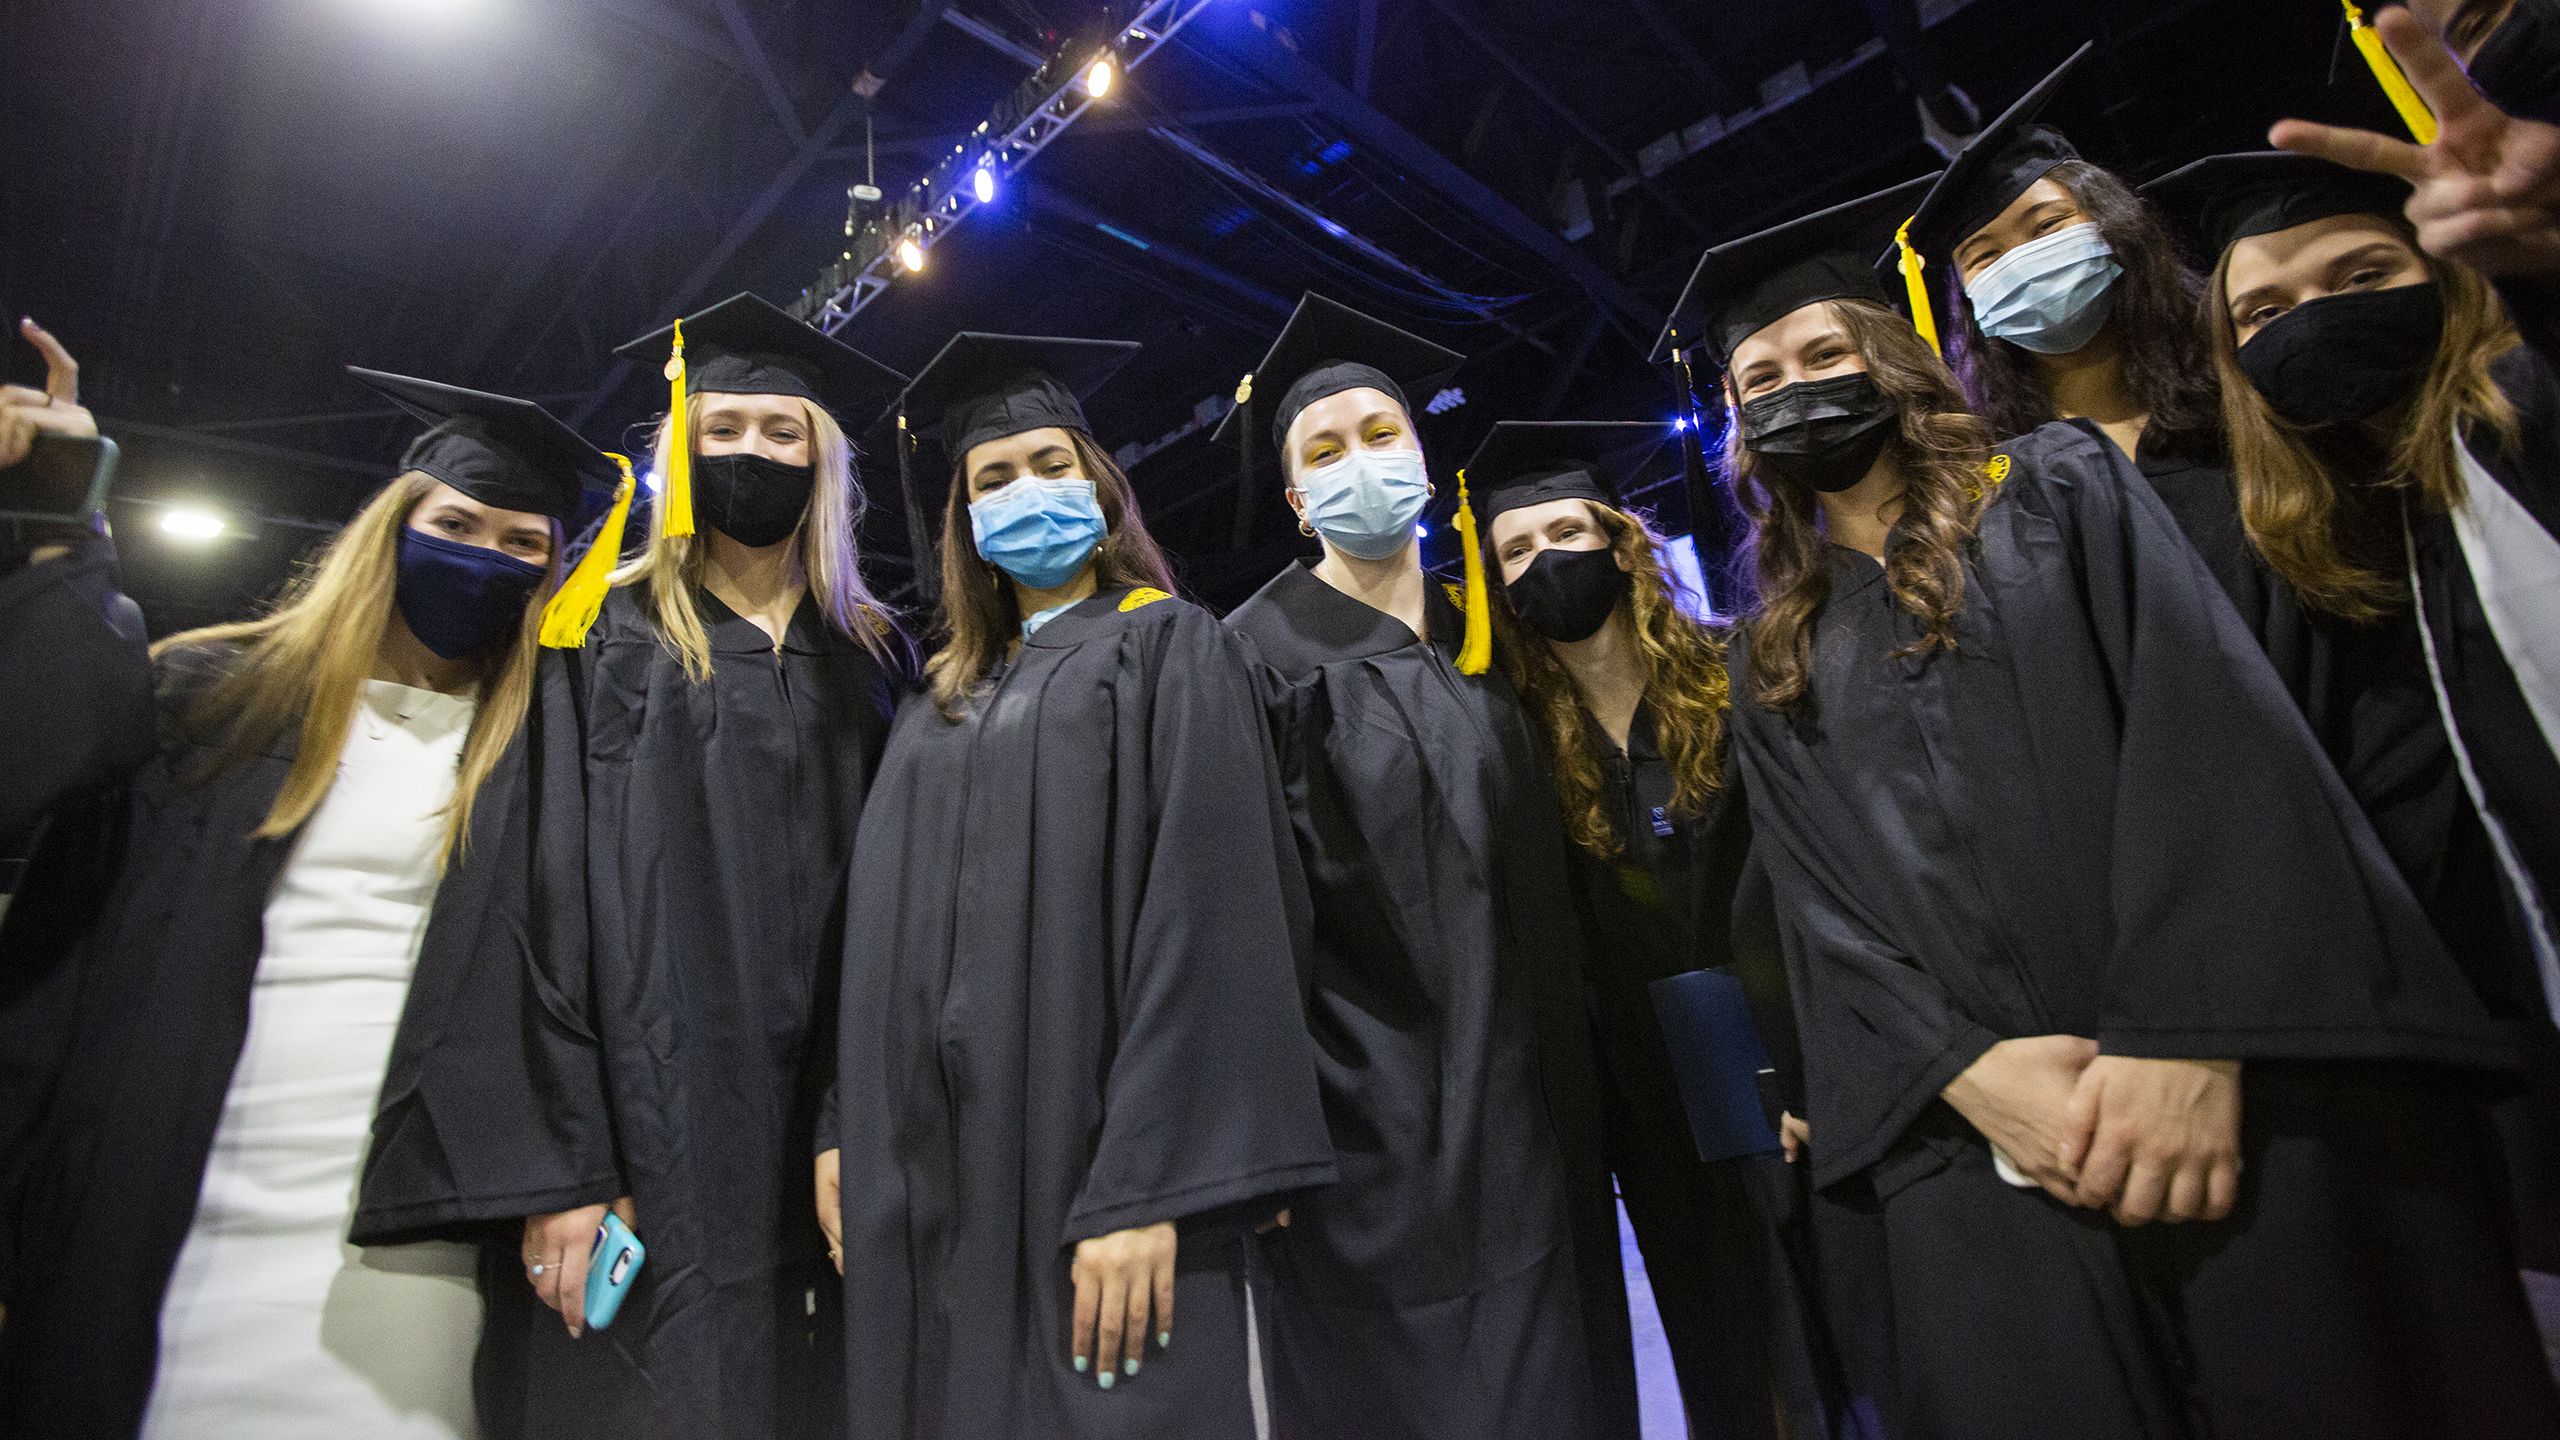 Students at Commencement at Georgia World Congress Center